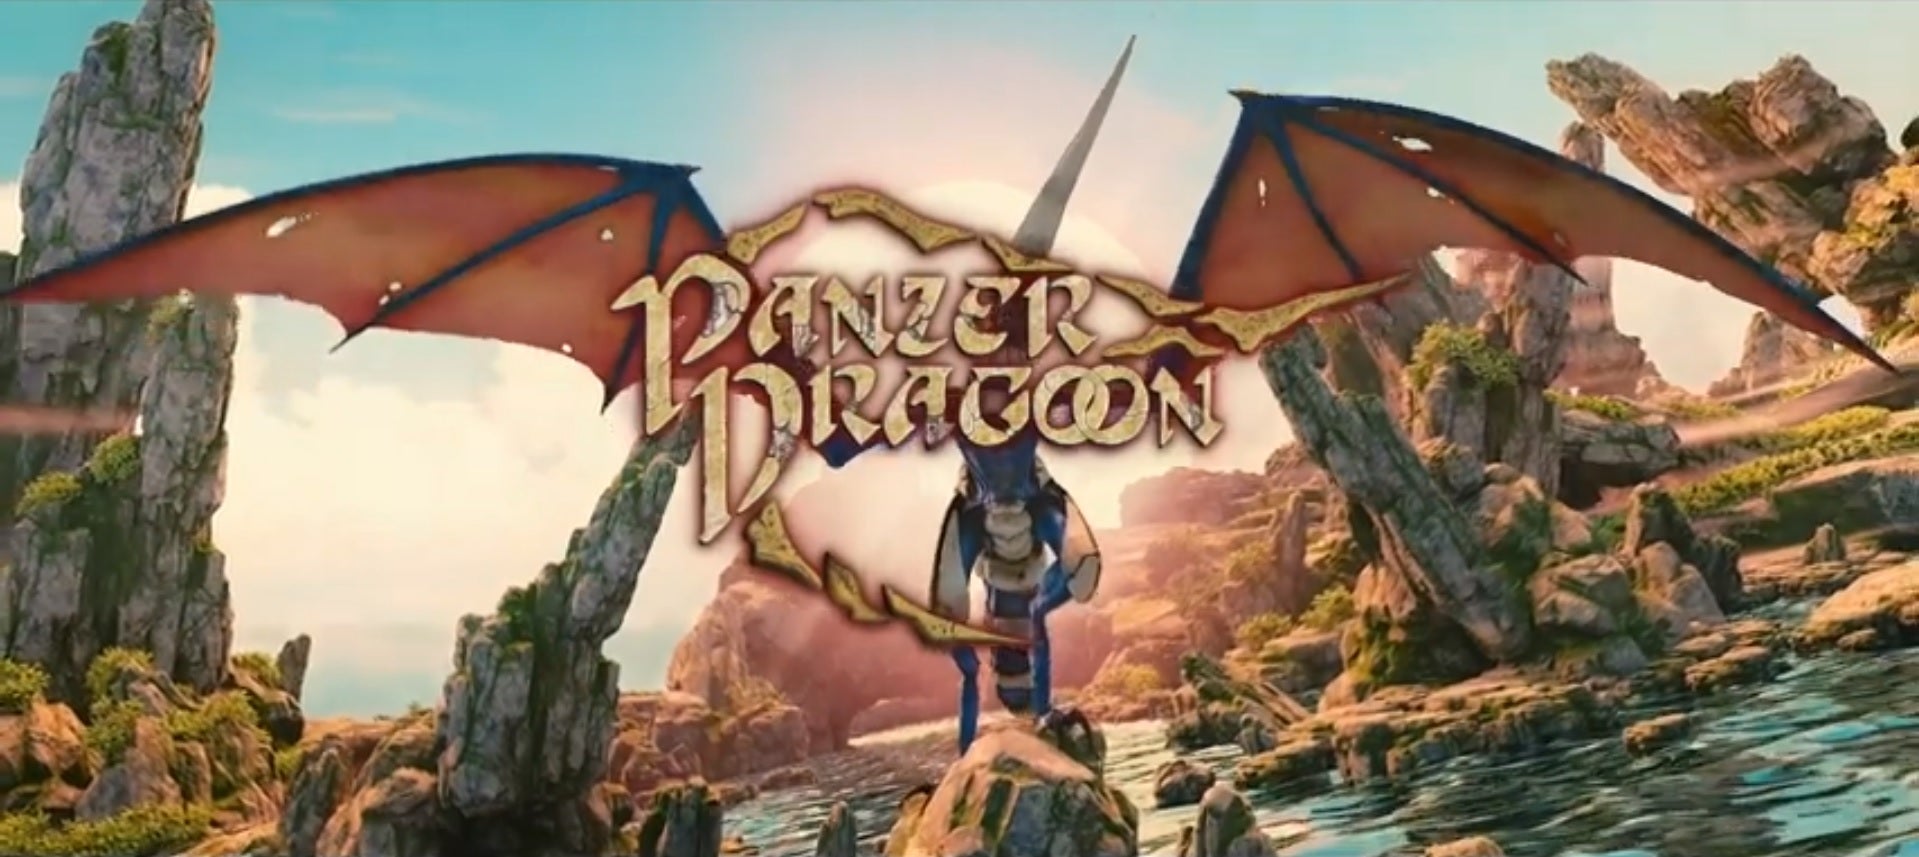 Image for The Panzer Dragoon remake is coming to Steam as well as Switch